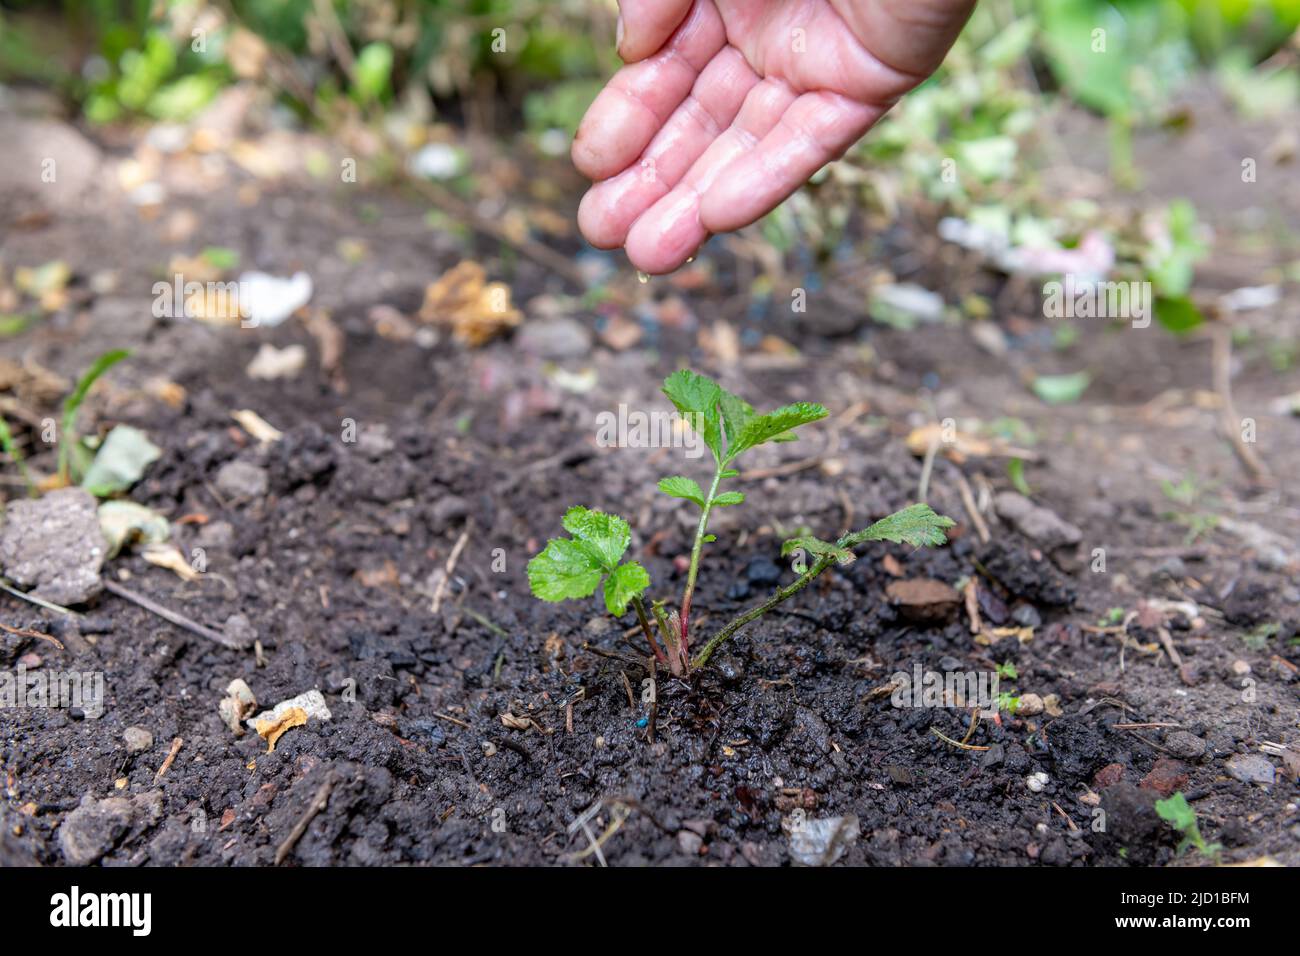 A person hand watering a recently planted sapling. Stock Photo